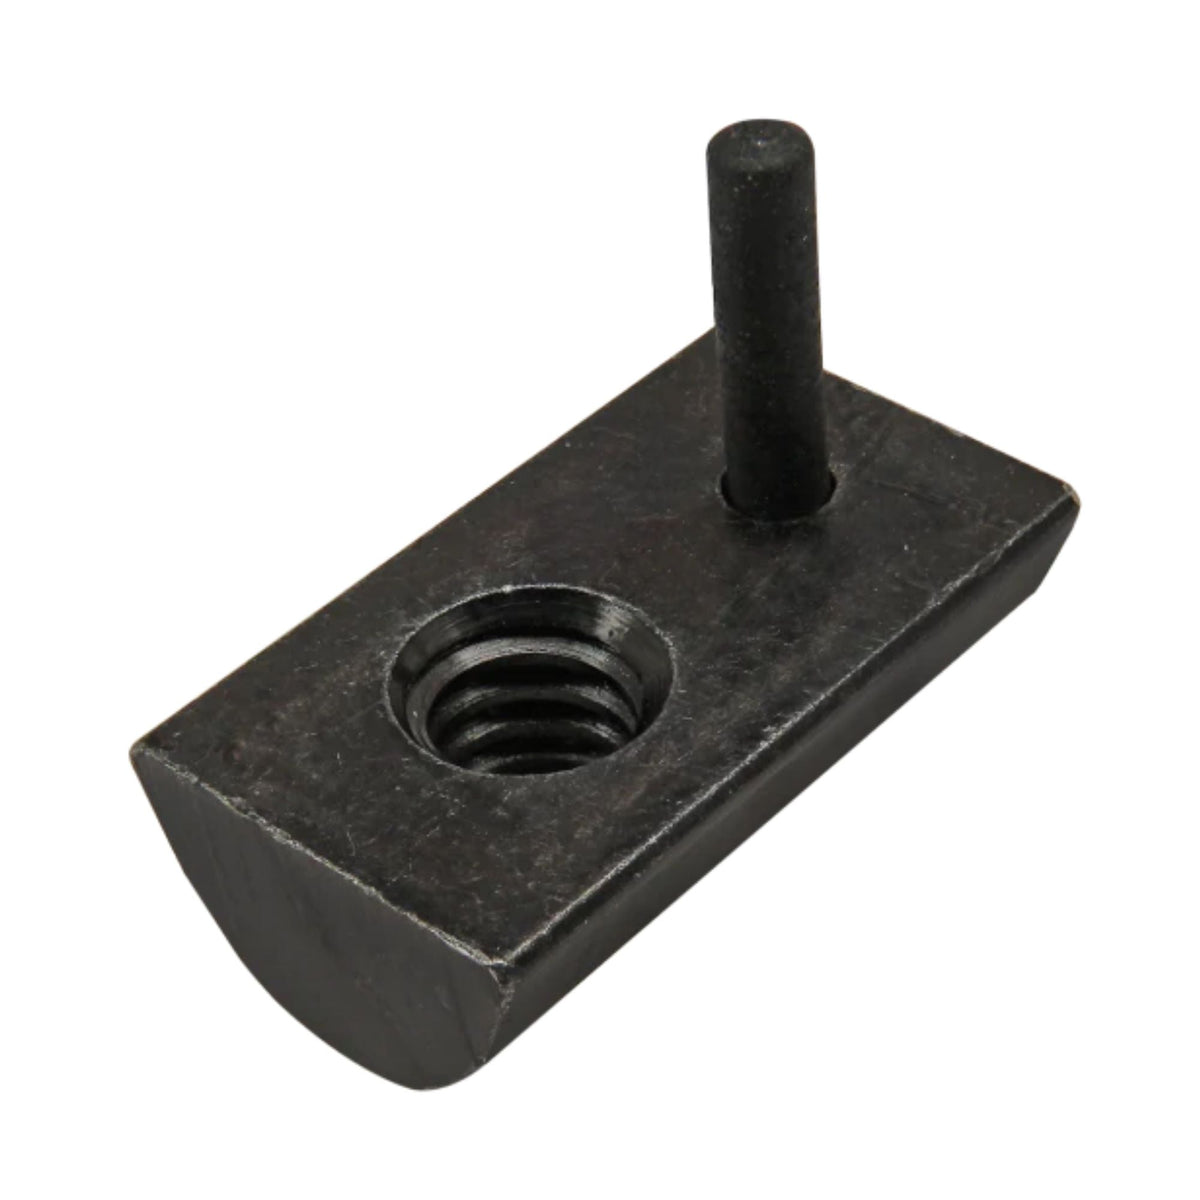 top view of a rectangular drop in T-nut with a rounded bottom, a hole on the left side and a cylindrical rod sticking through the top on the right side